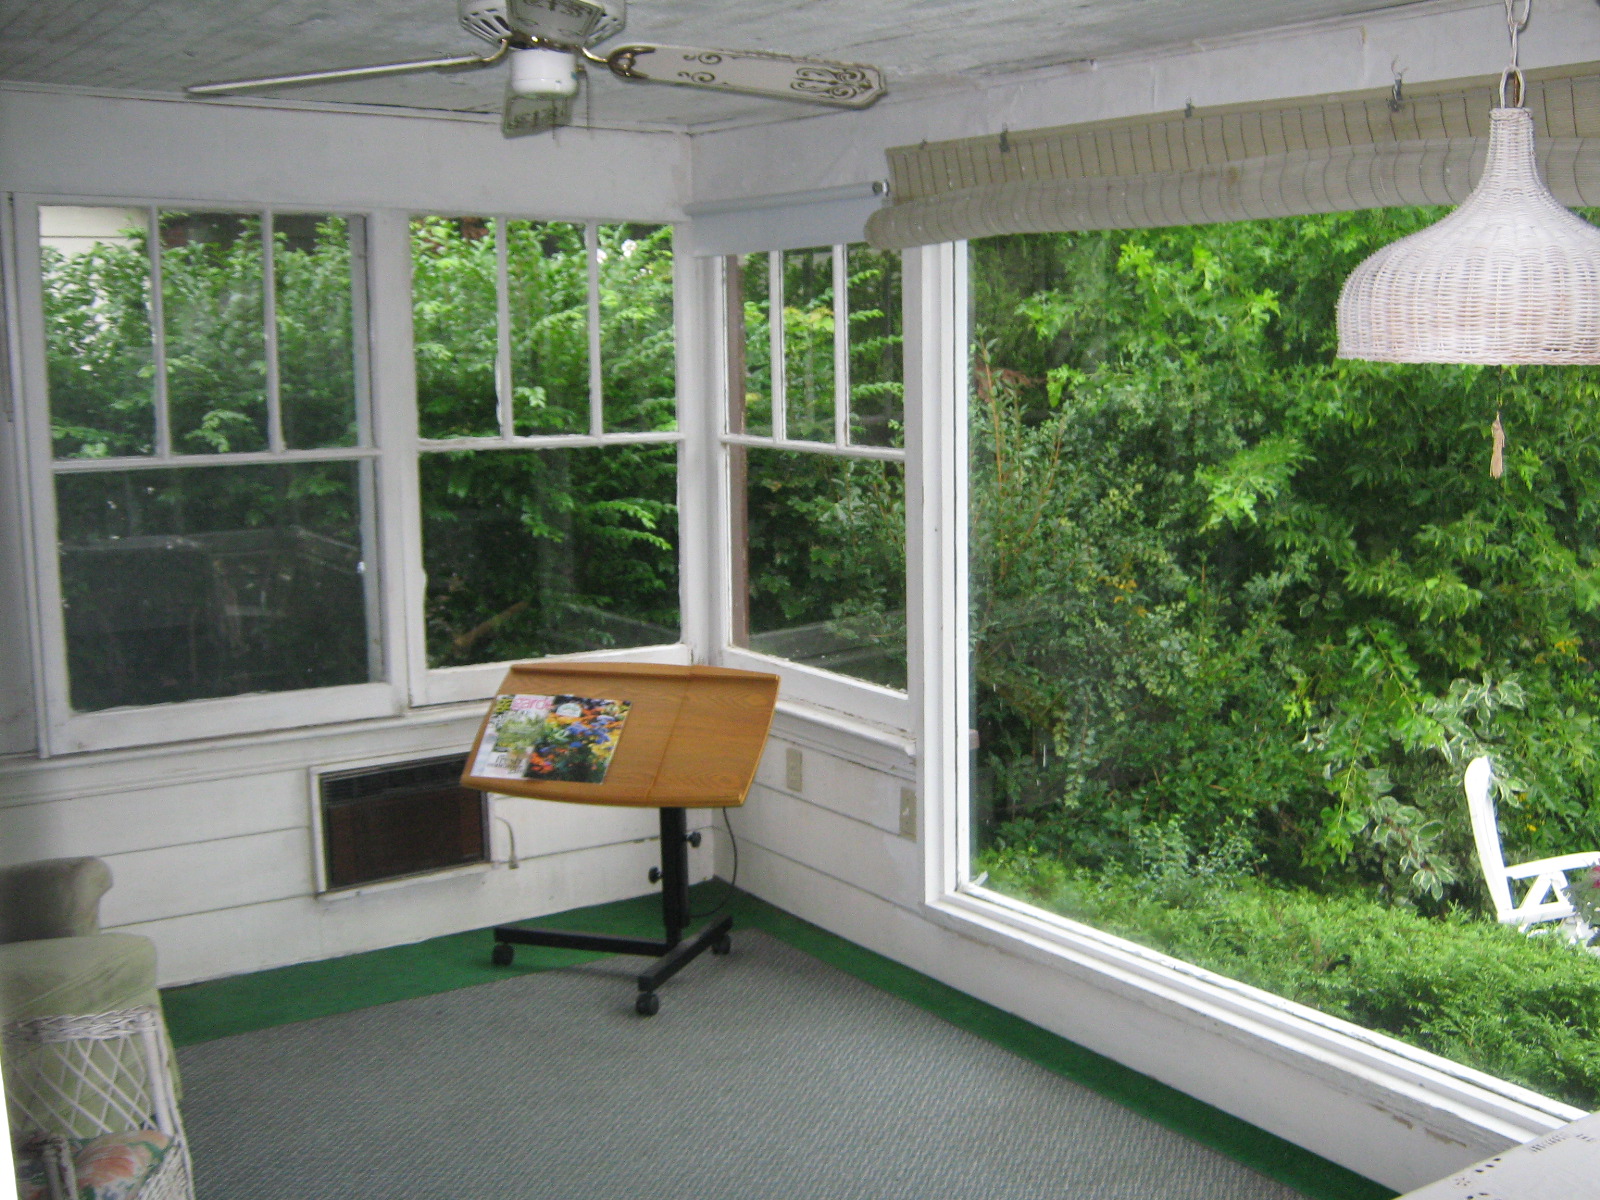 Sunroom would make an excellent Family Room